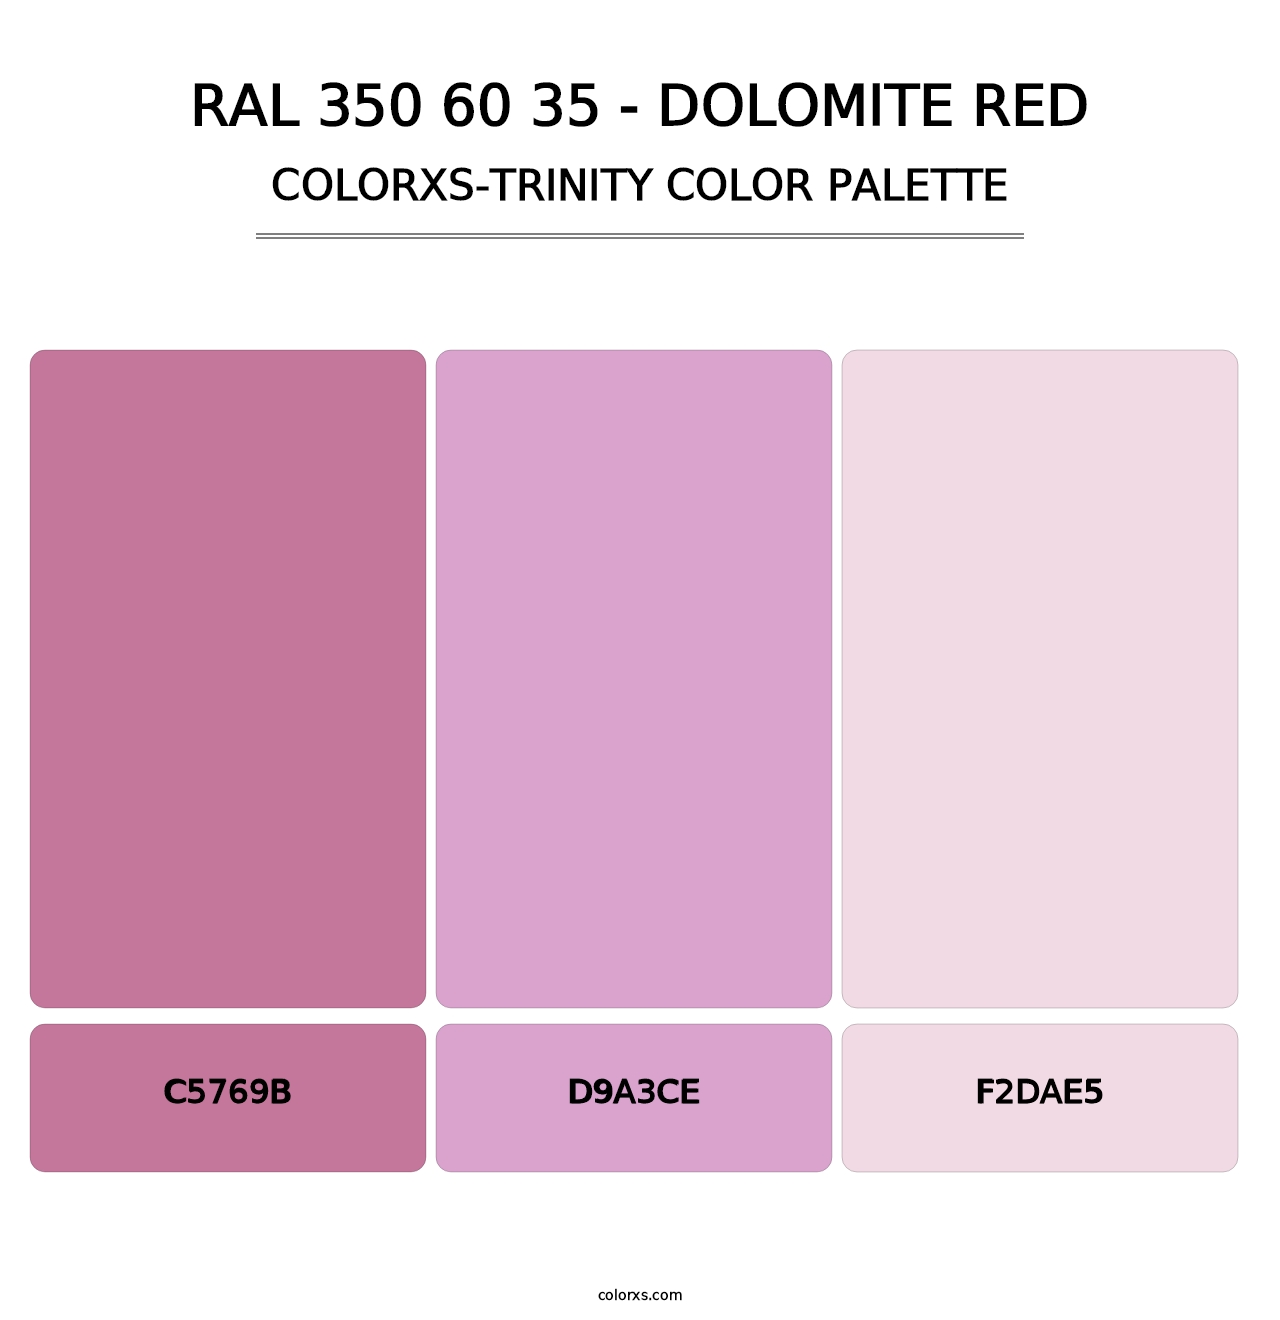 RAL 350 60 35 - Dolomite Red - Colorxs Trinity Palette